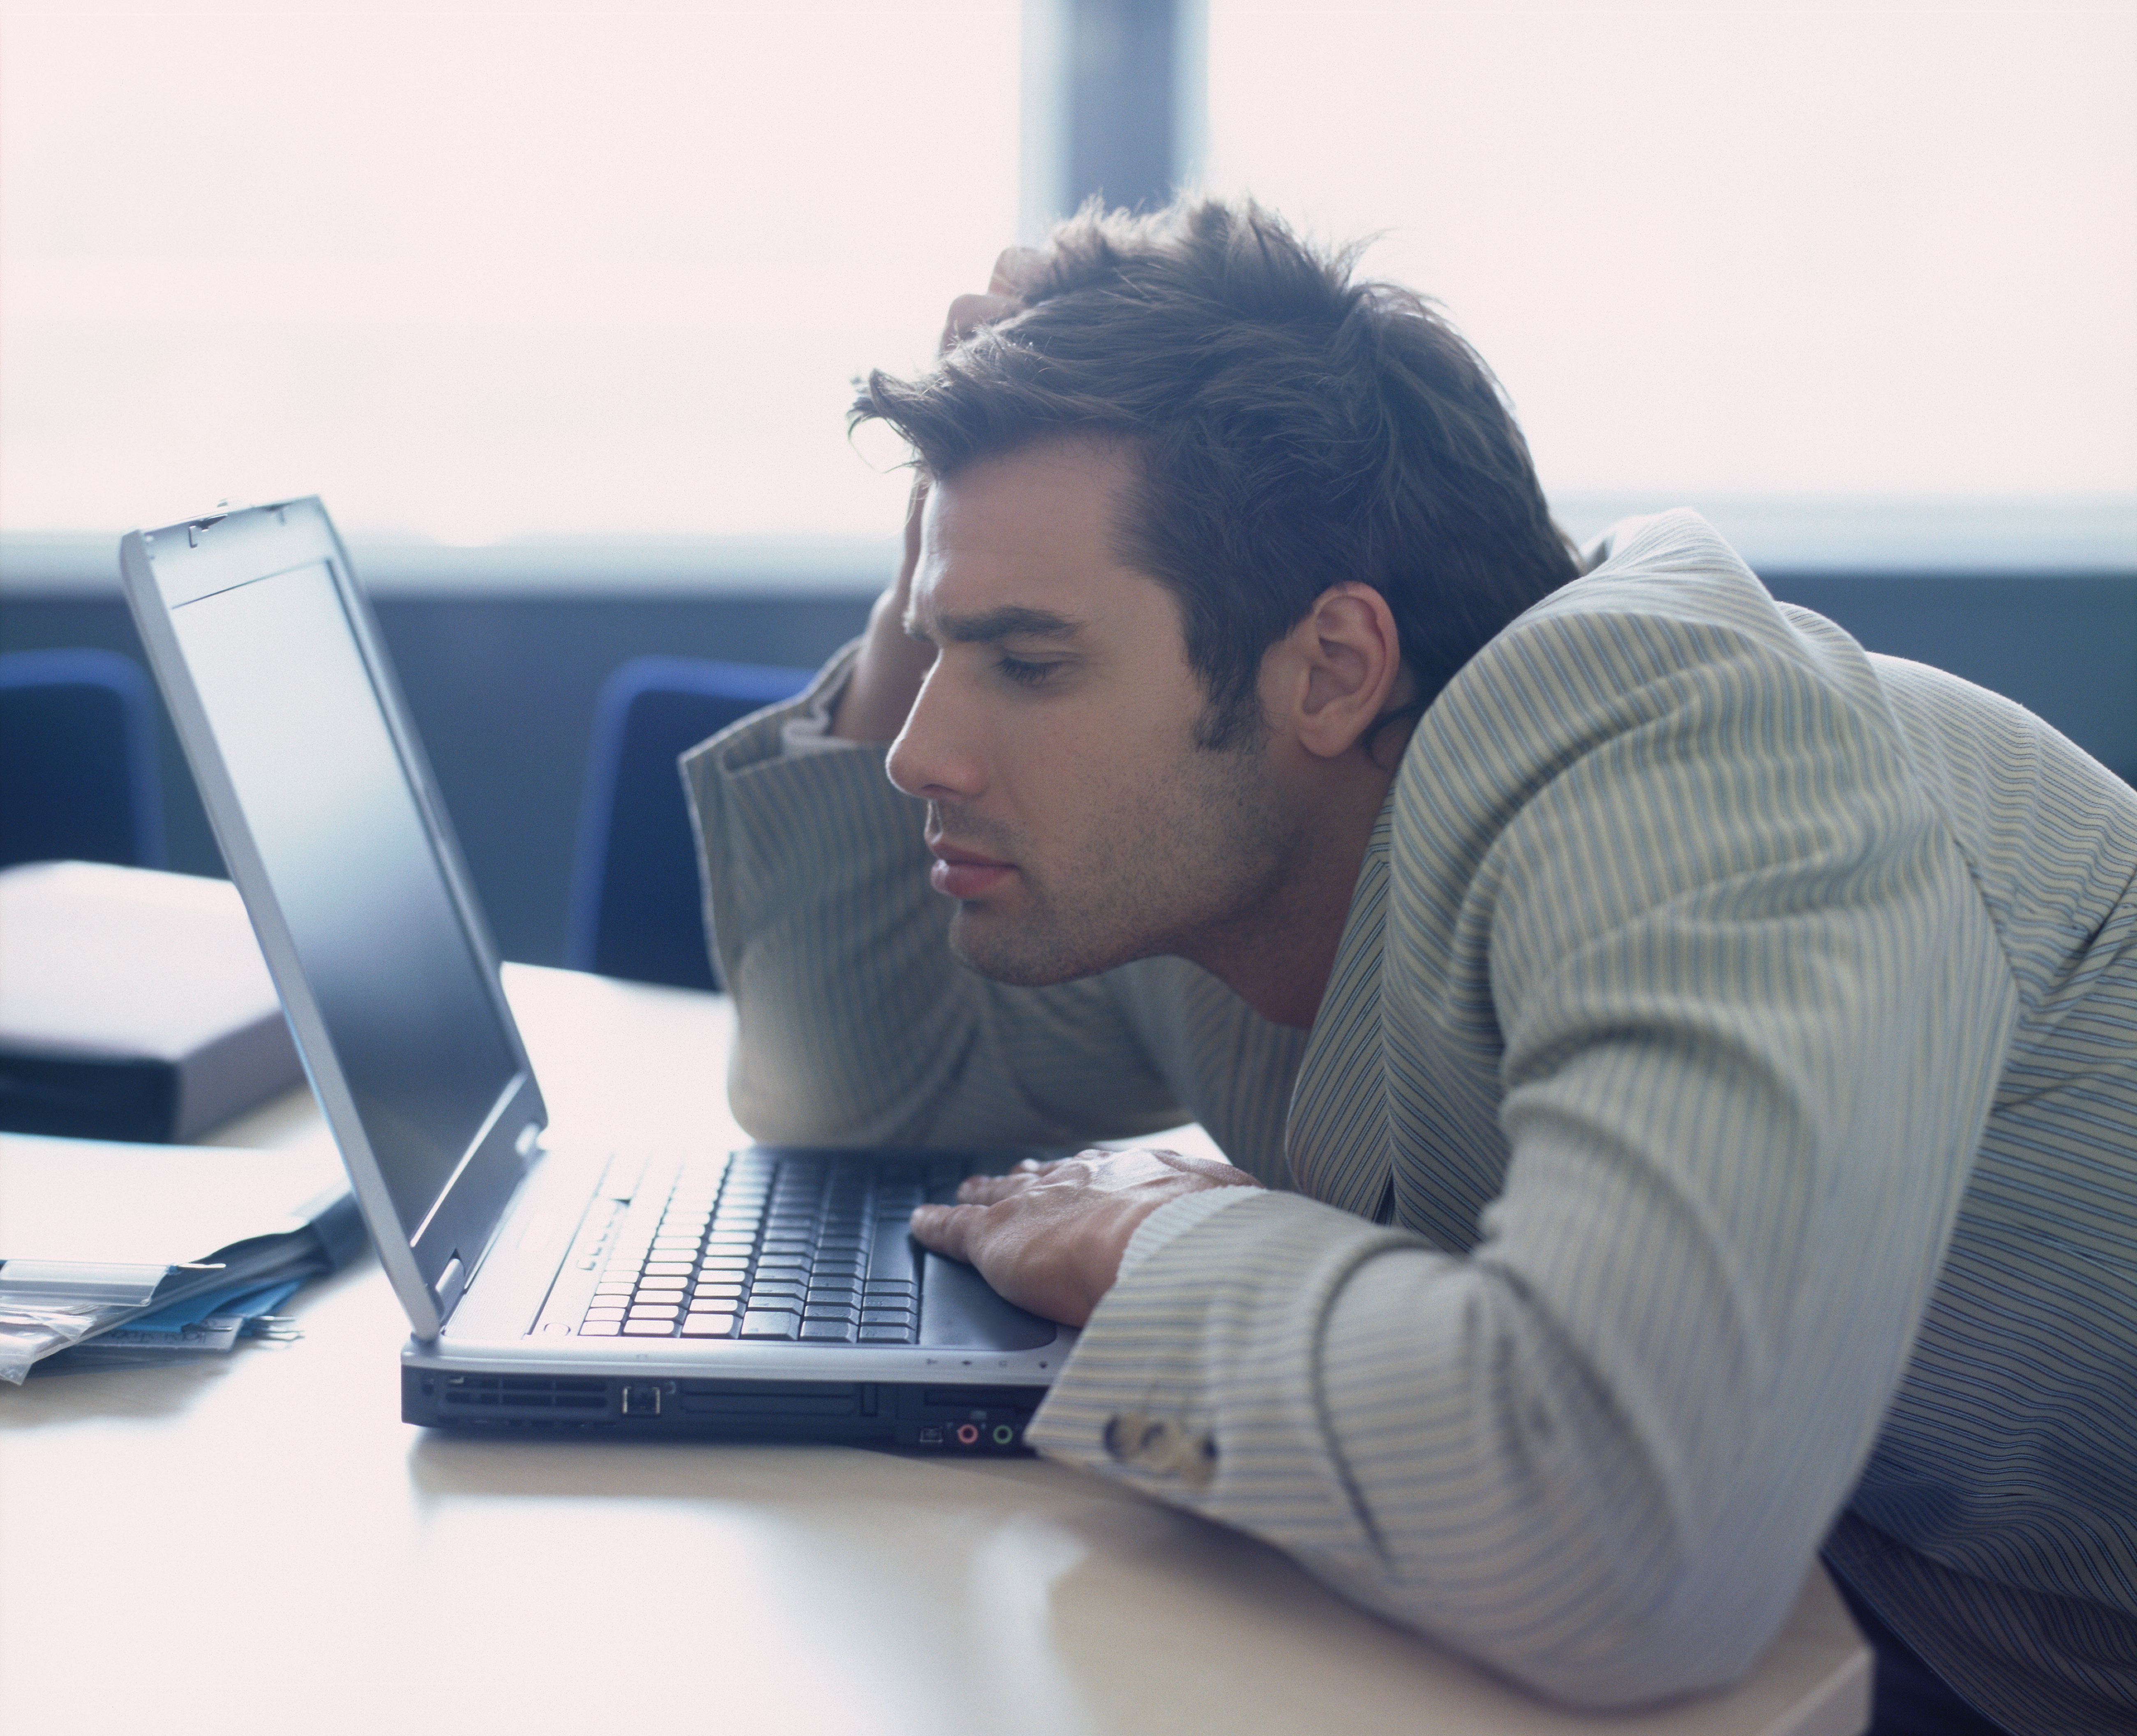 A man slouching over his laptop | Source: Shutterstock